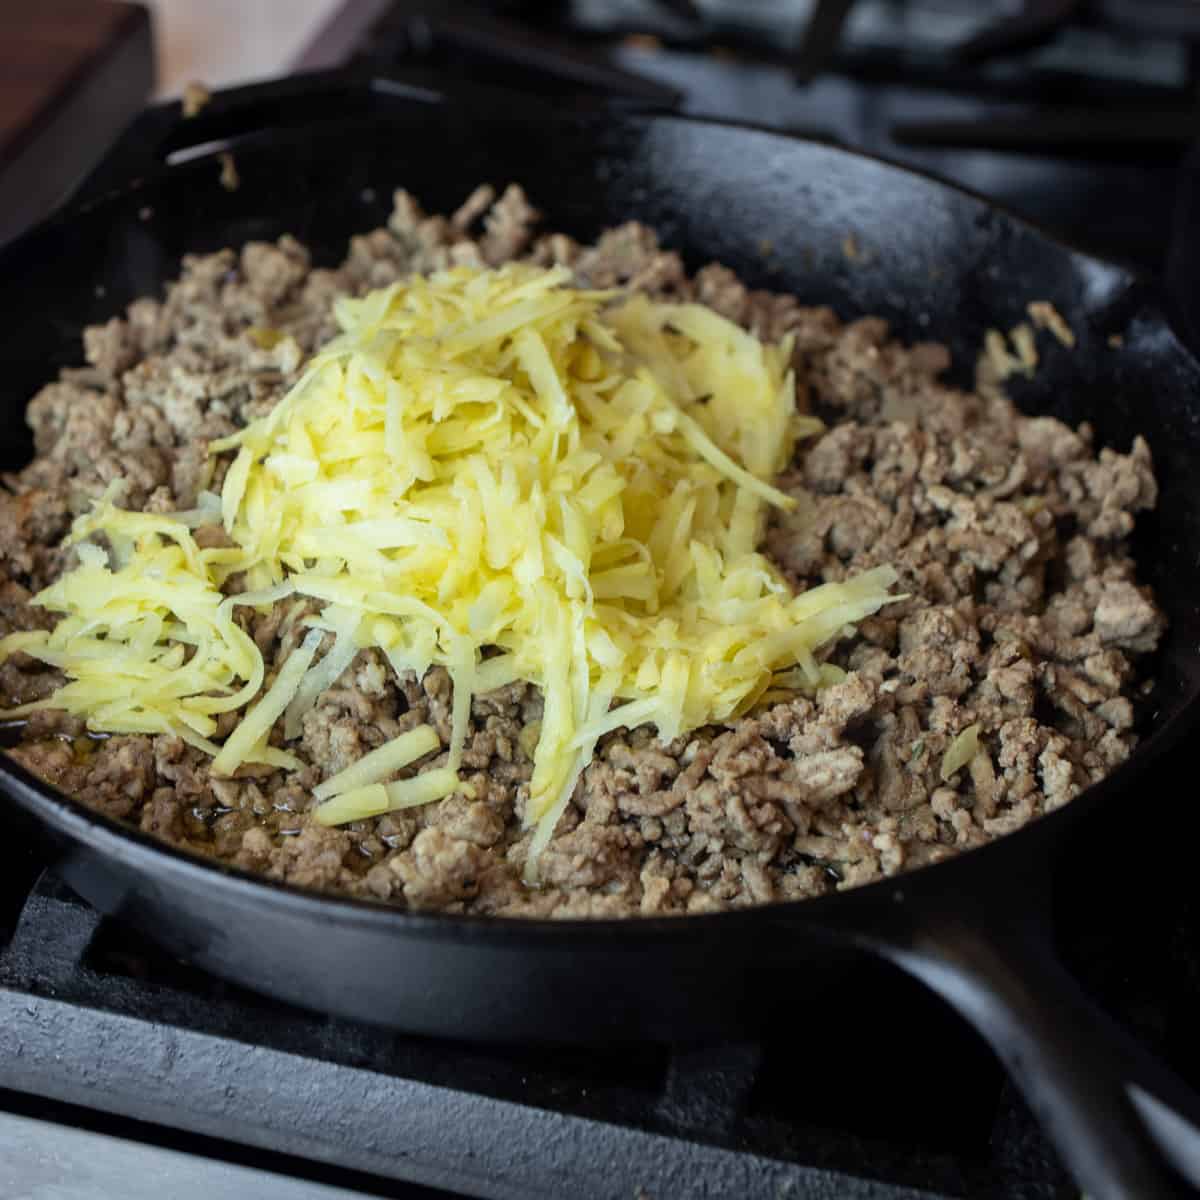 Grated raw potatoes added to a pan with ground beef.